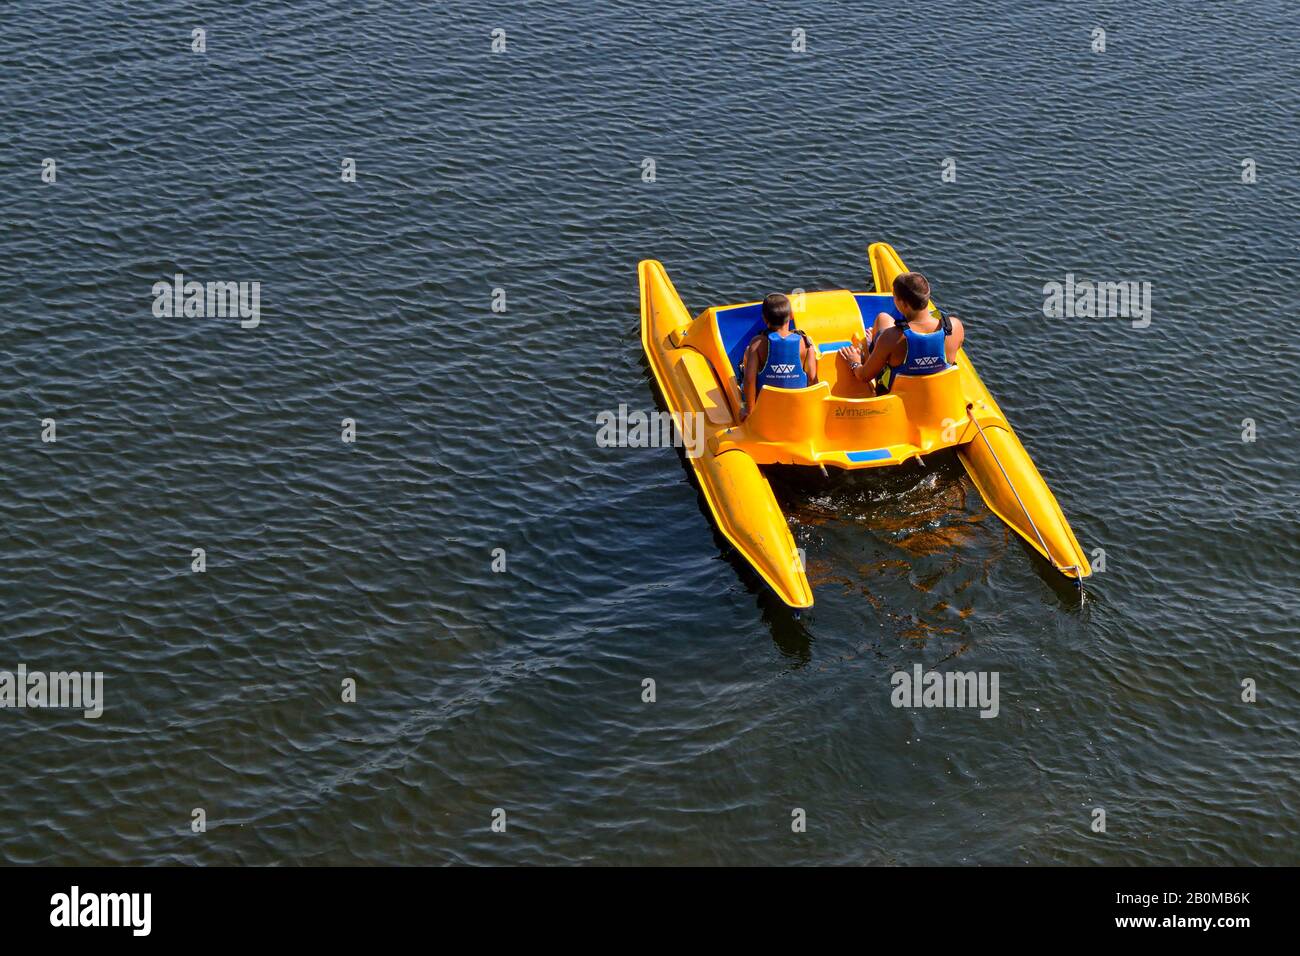 Ponte de lima river in Portugal two kids on pedaling boat having fun at summer. Kids on boats with safety water gear vests. Brothers together. Stock Photo